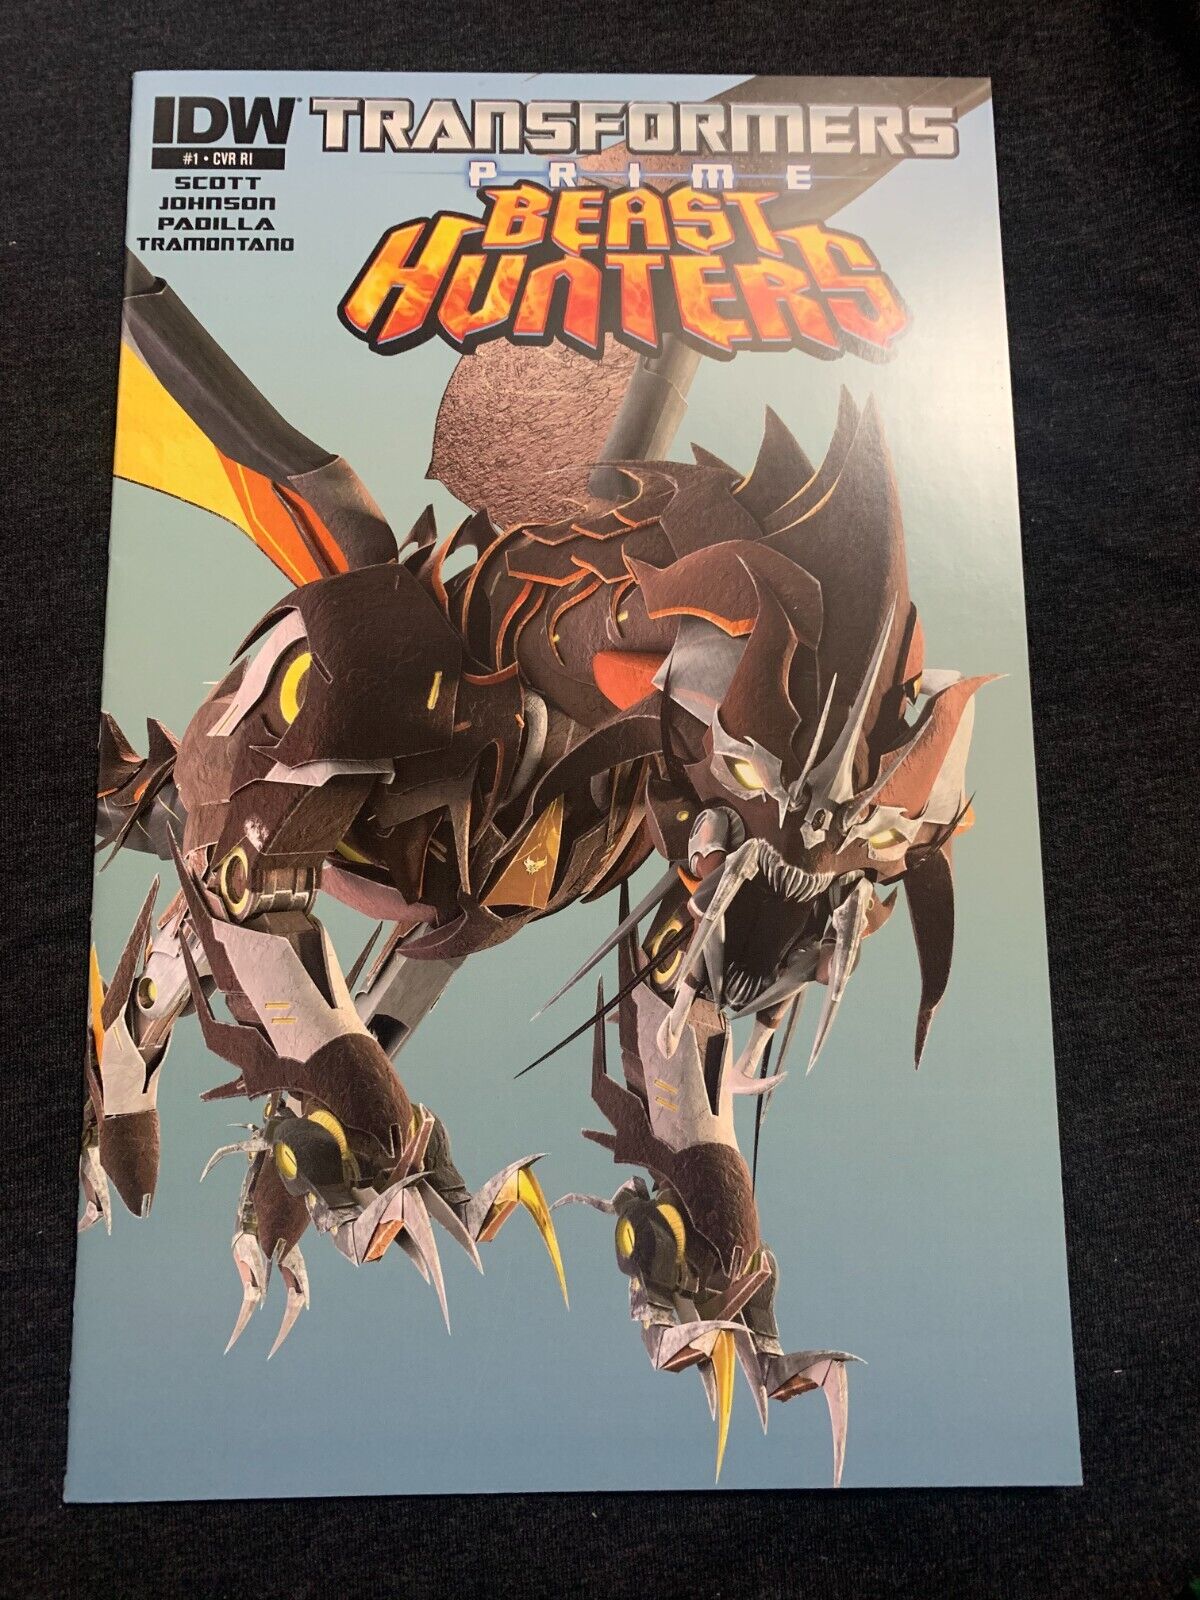 Transformers Prime Beast Hunters #1 Variant 1:10 Retailer Incentive IDW 2013